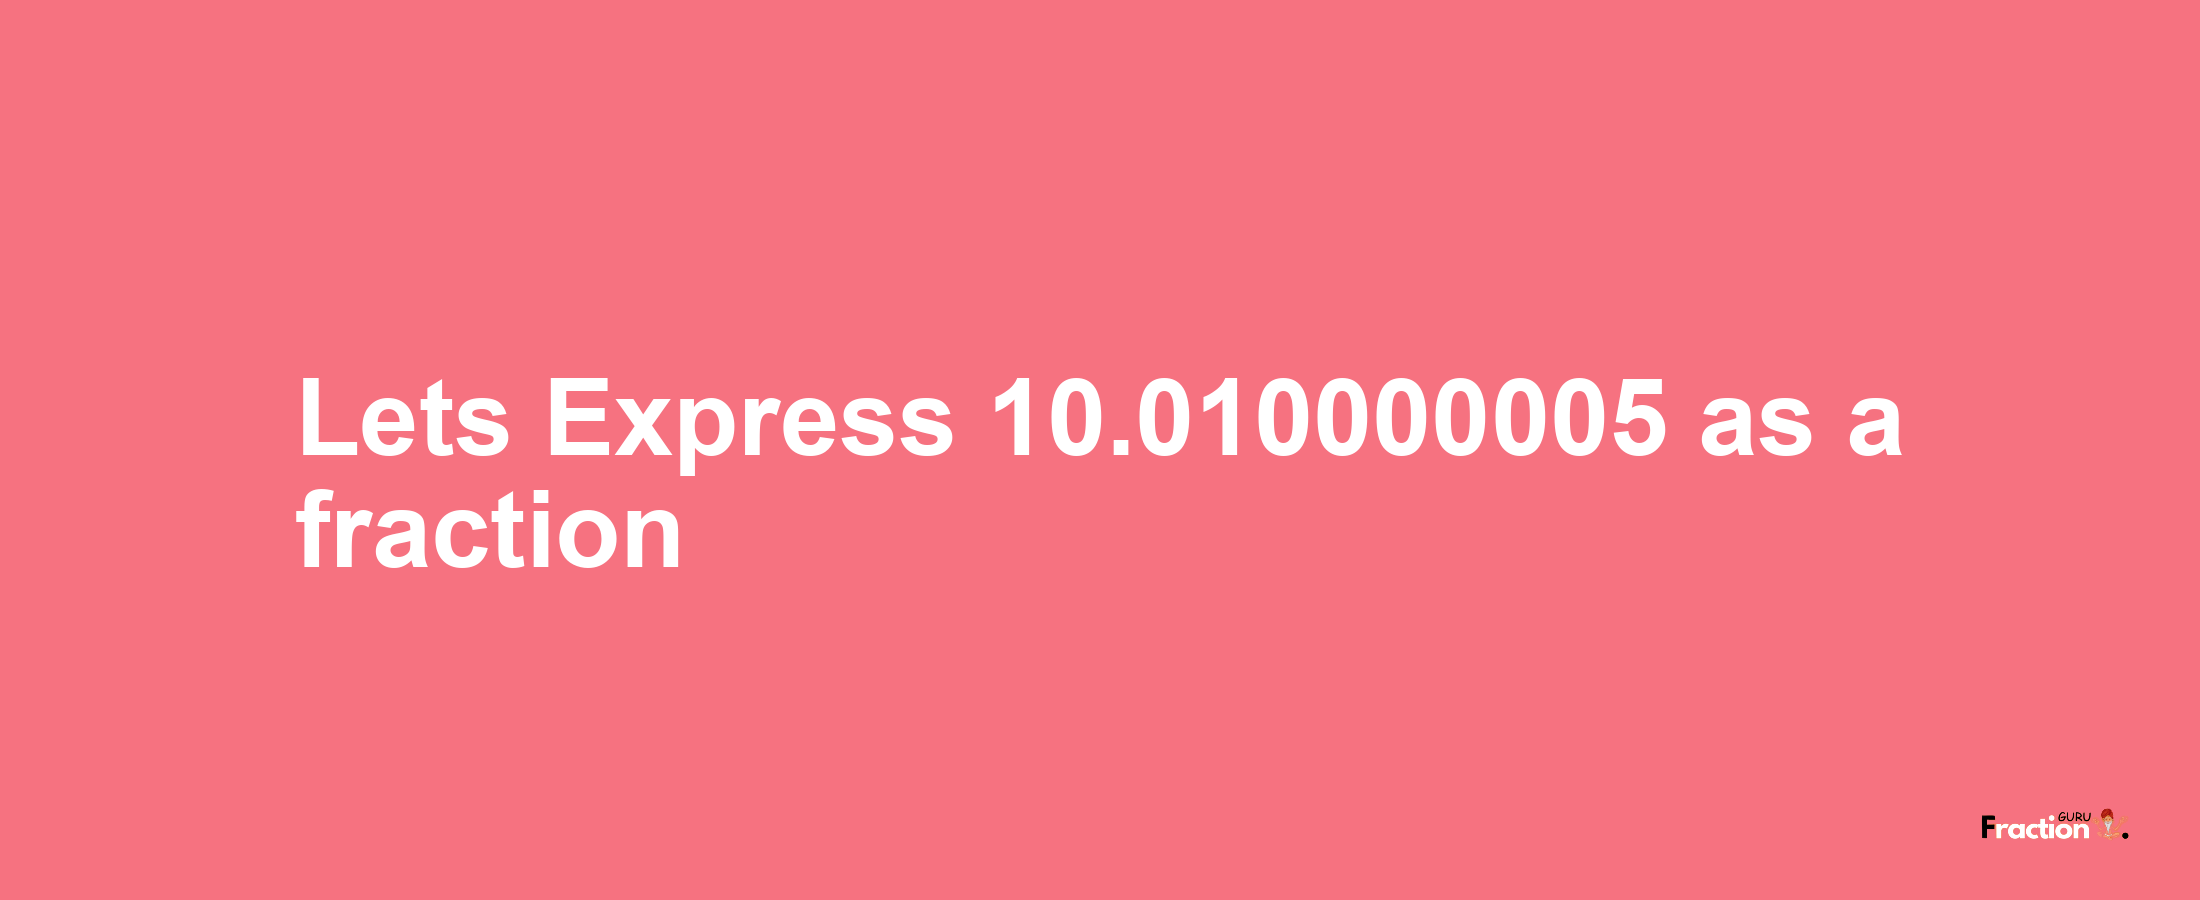 Lets Express 10.010000005 as afraction